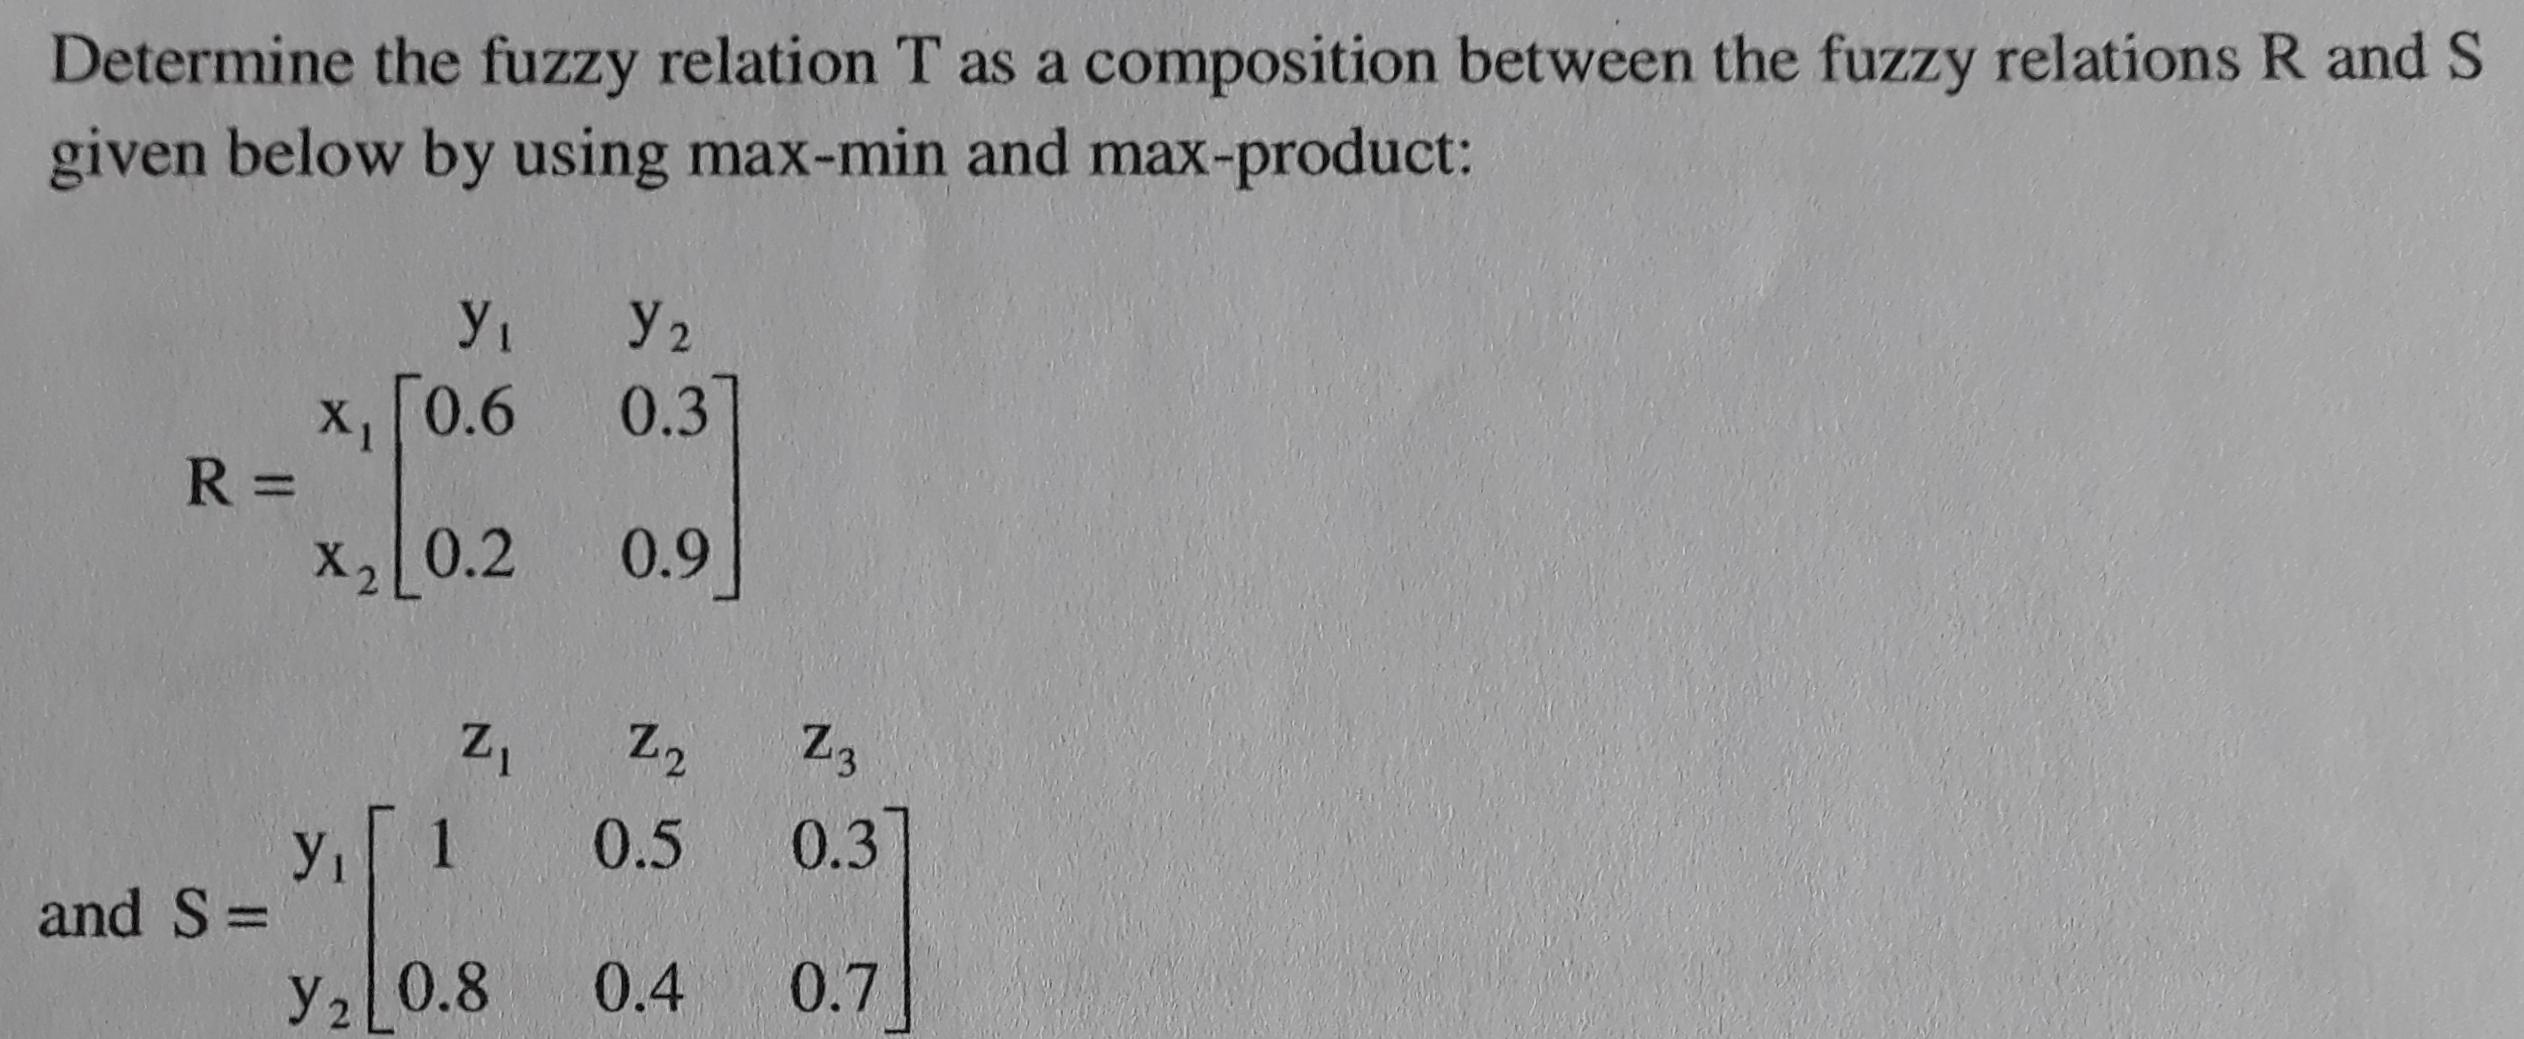 Determine the fuzzy relation T as a composition between the fuzzy relations R and S given below by using